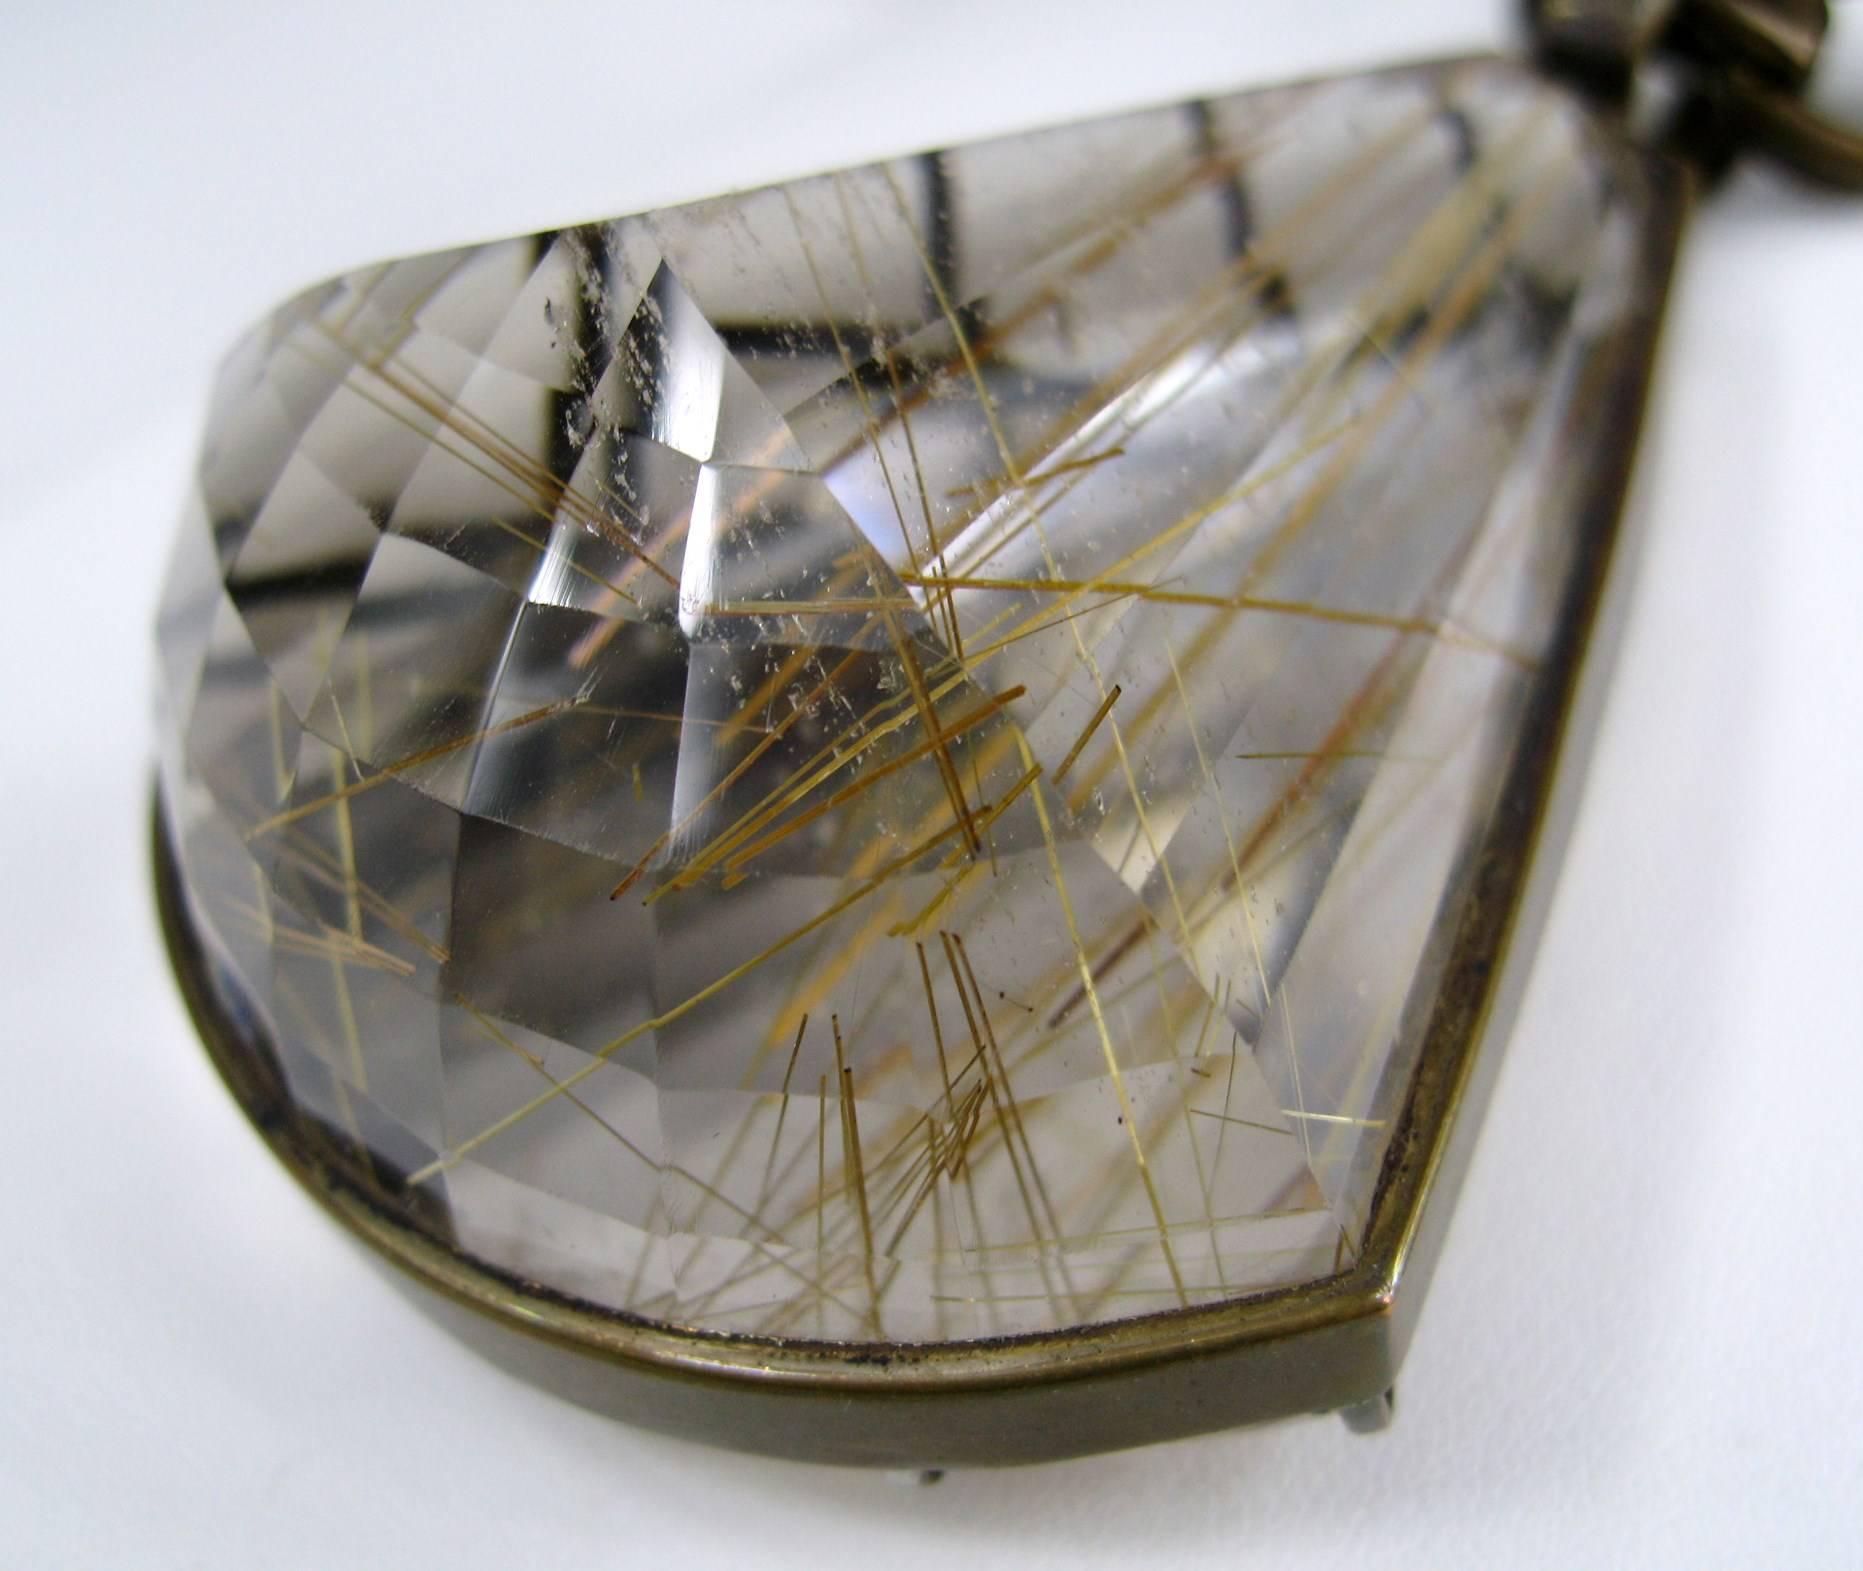 Stunning 1990s Stephen Dweck Bronze Rutilated quartz. The necklace measures approximately 32 inches long and drop down to about 39 inches, no clasp. The caged quartz measures 2.12 inches at the widest x 3.00 inches top to bottom. This is out of a